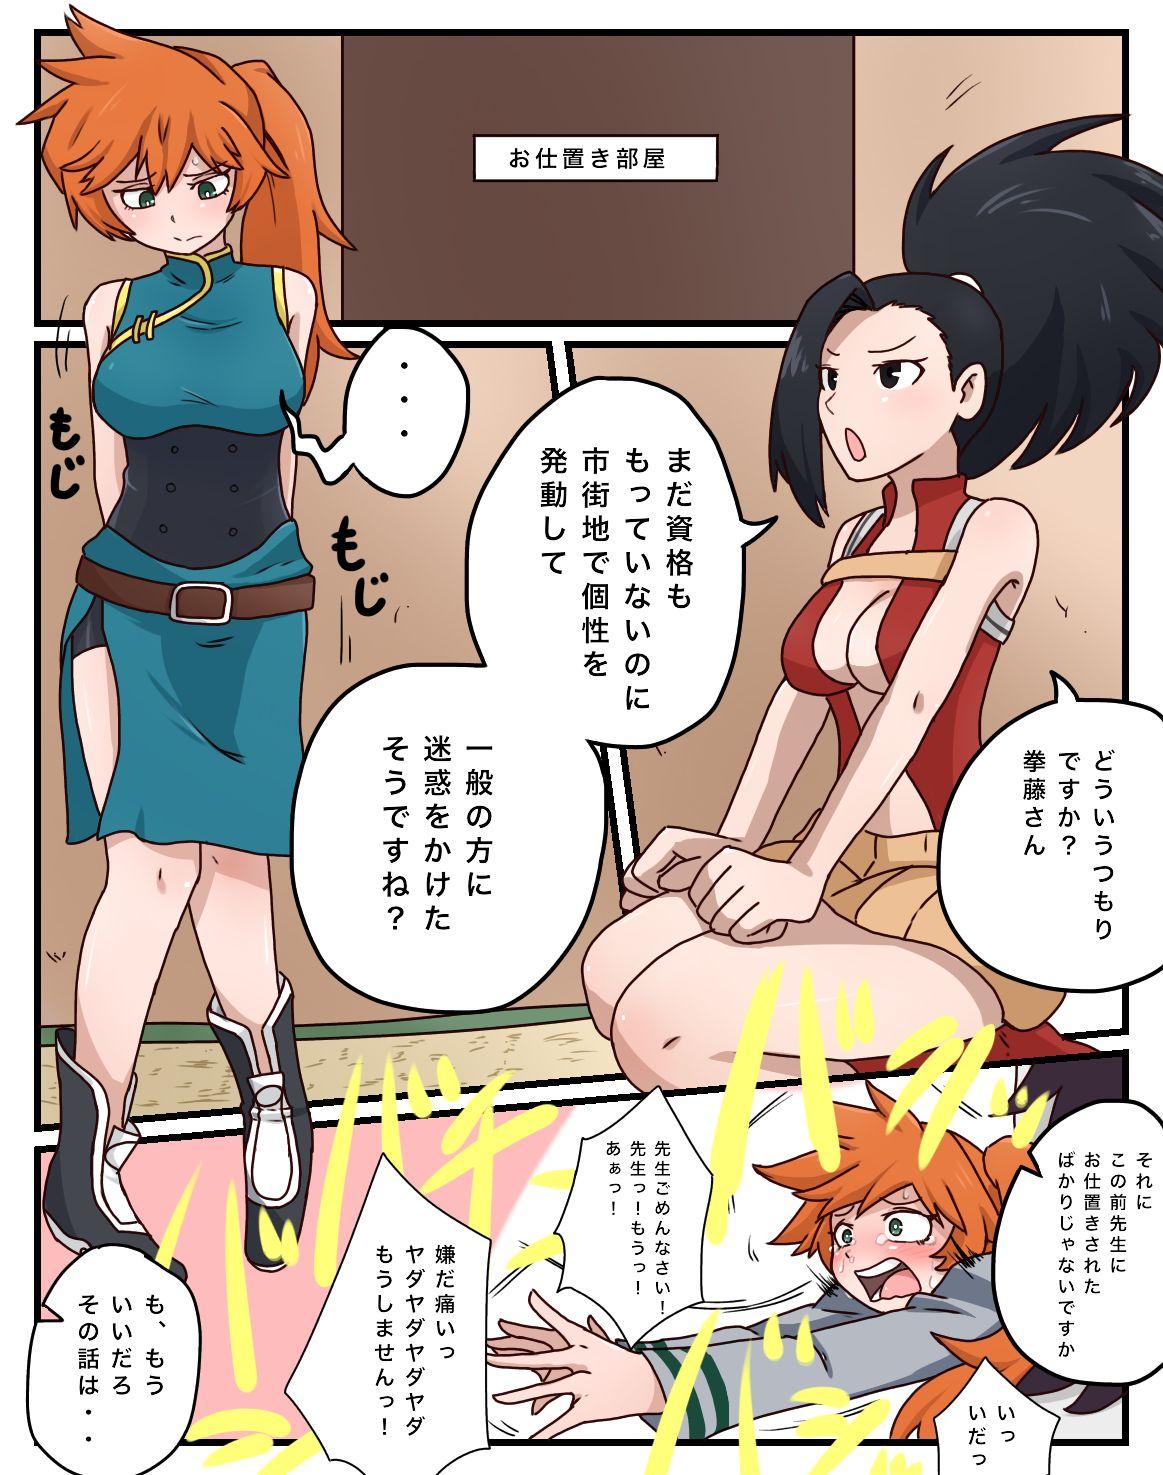 Woman 真面目と姉御 - My hero academia Gay - Picture 1